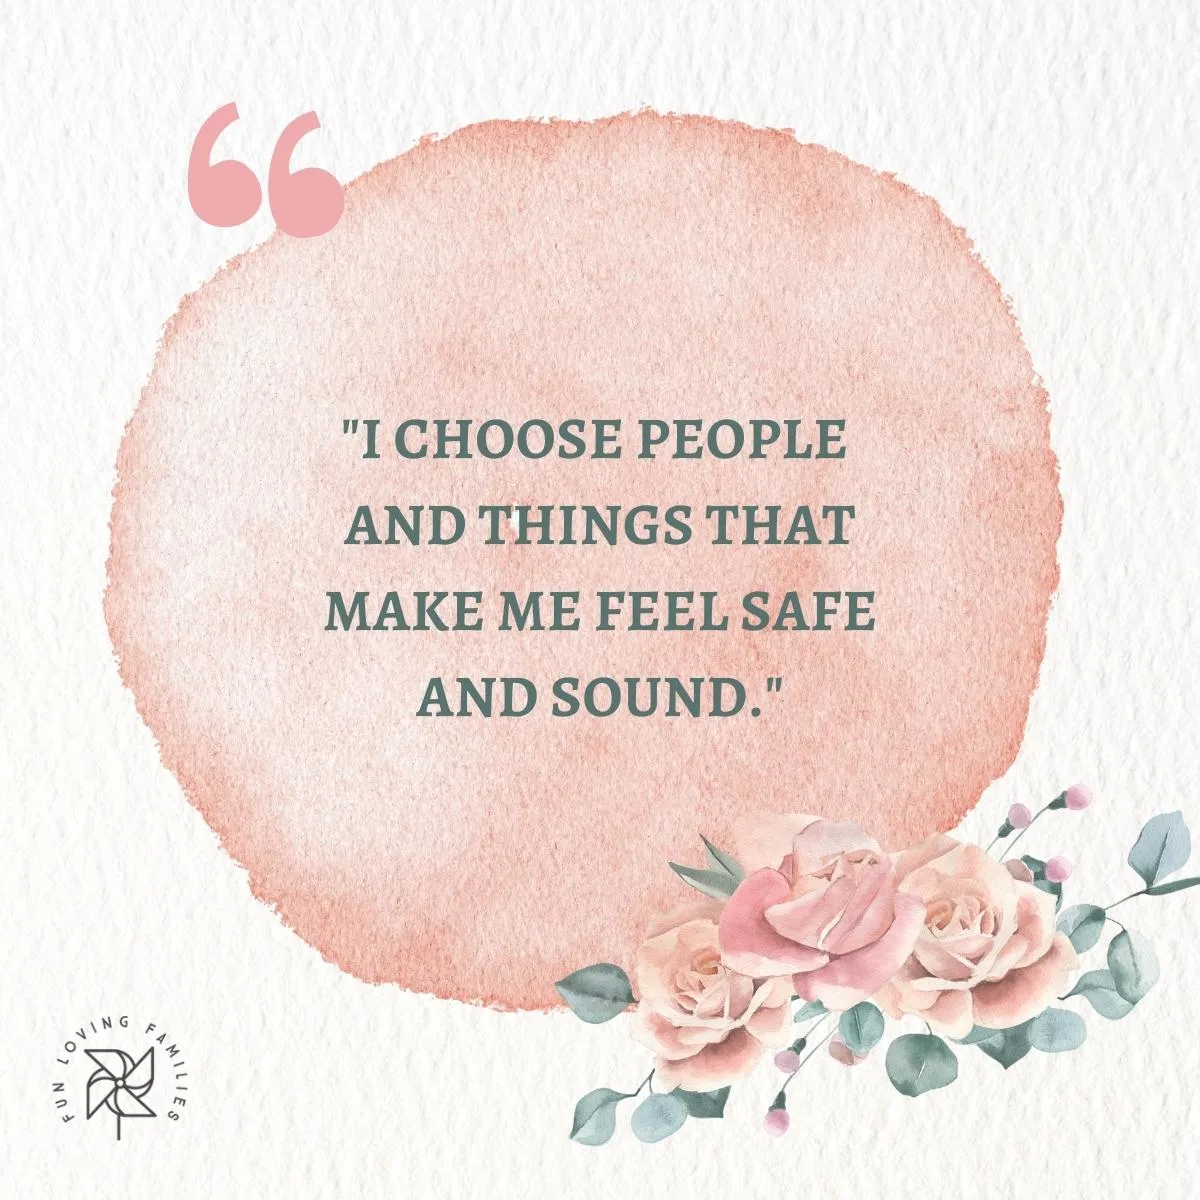 I choose people and things that make me feel safe and sound affirmation